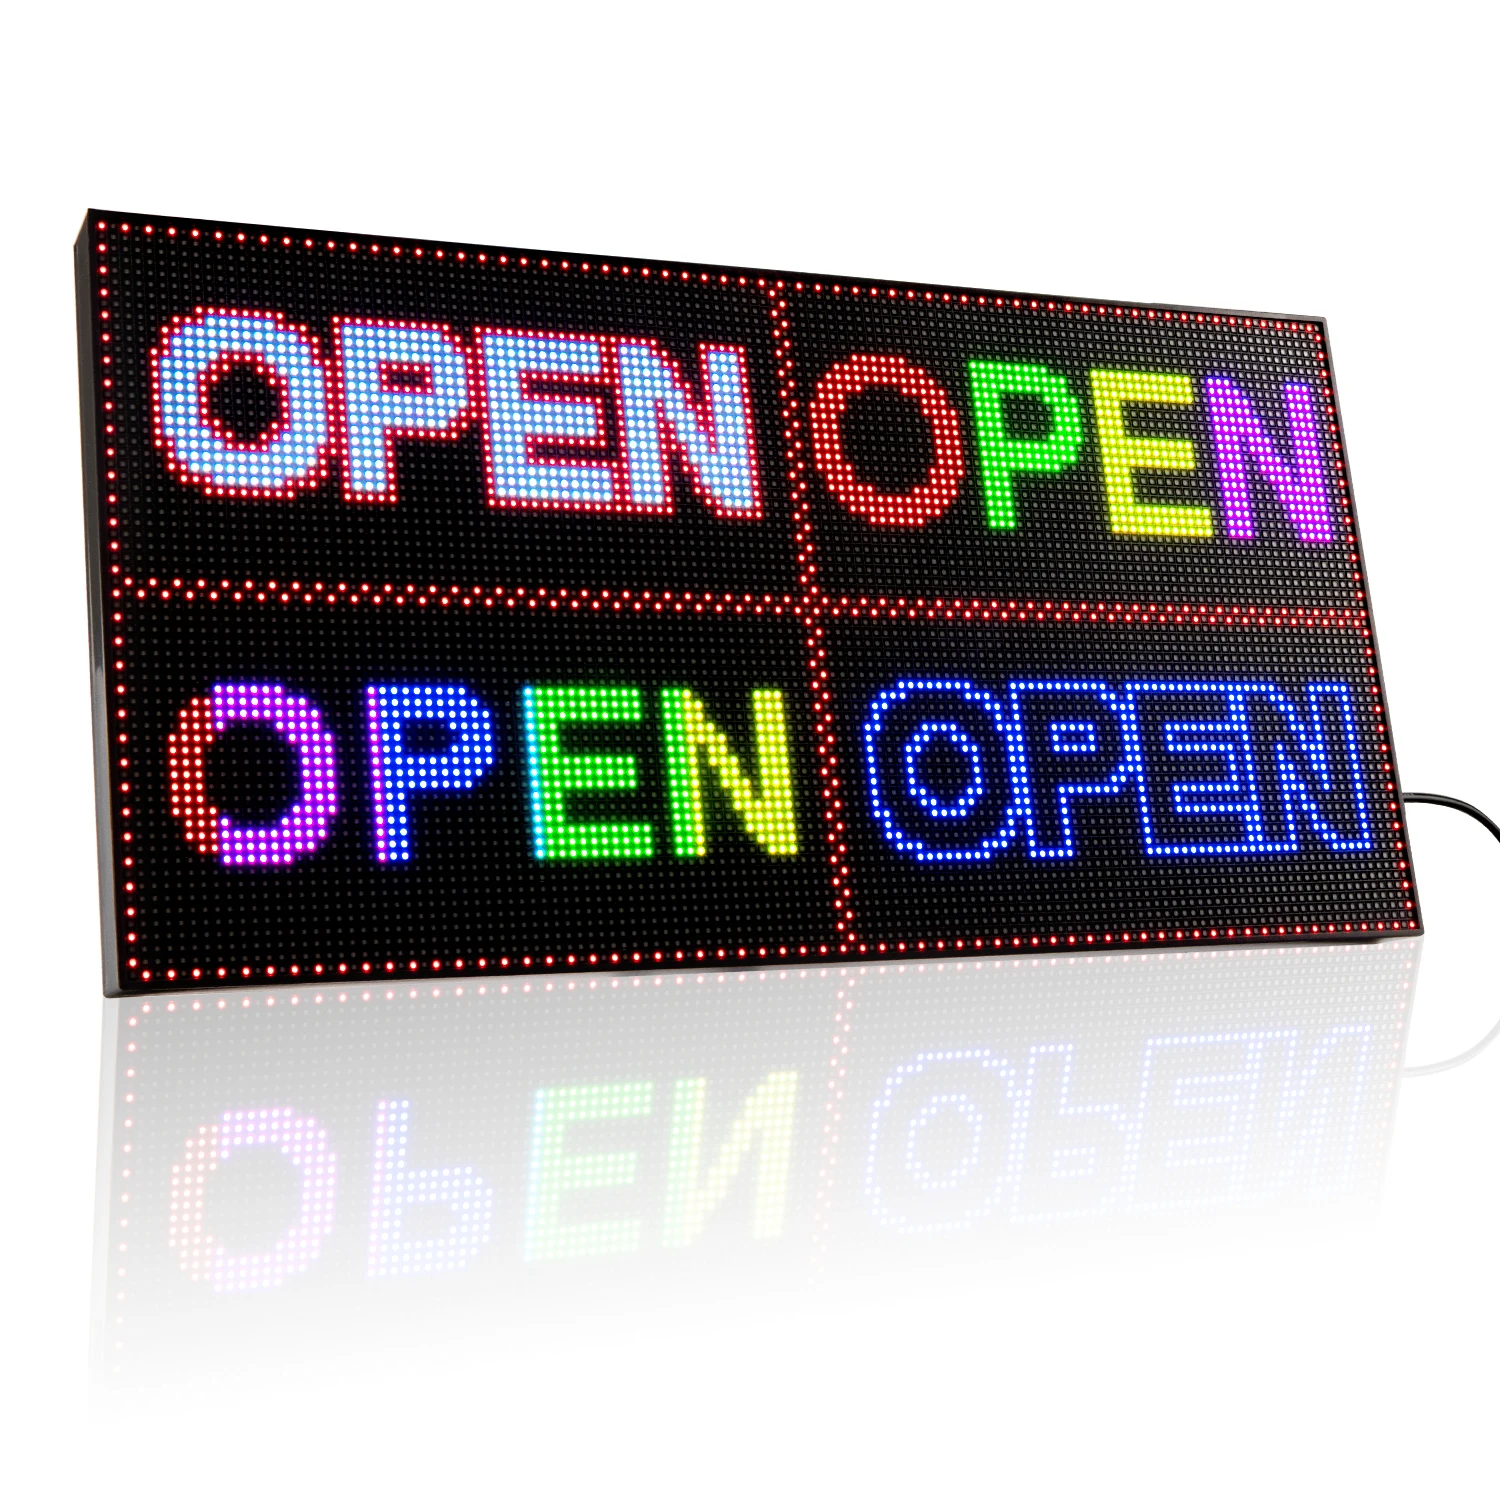 P3 Led Open Sign Display Portable Rgb Led Display Board Wifi Programmable  Action Message Led Panel 39cm With Foldable Stand Dc5v Led Displays  AliExpress